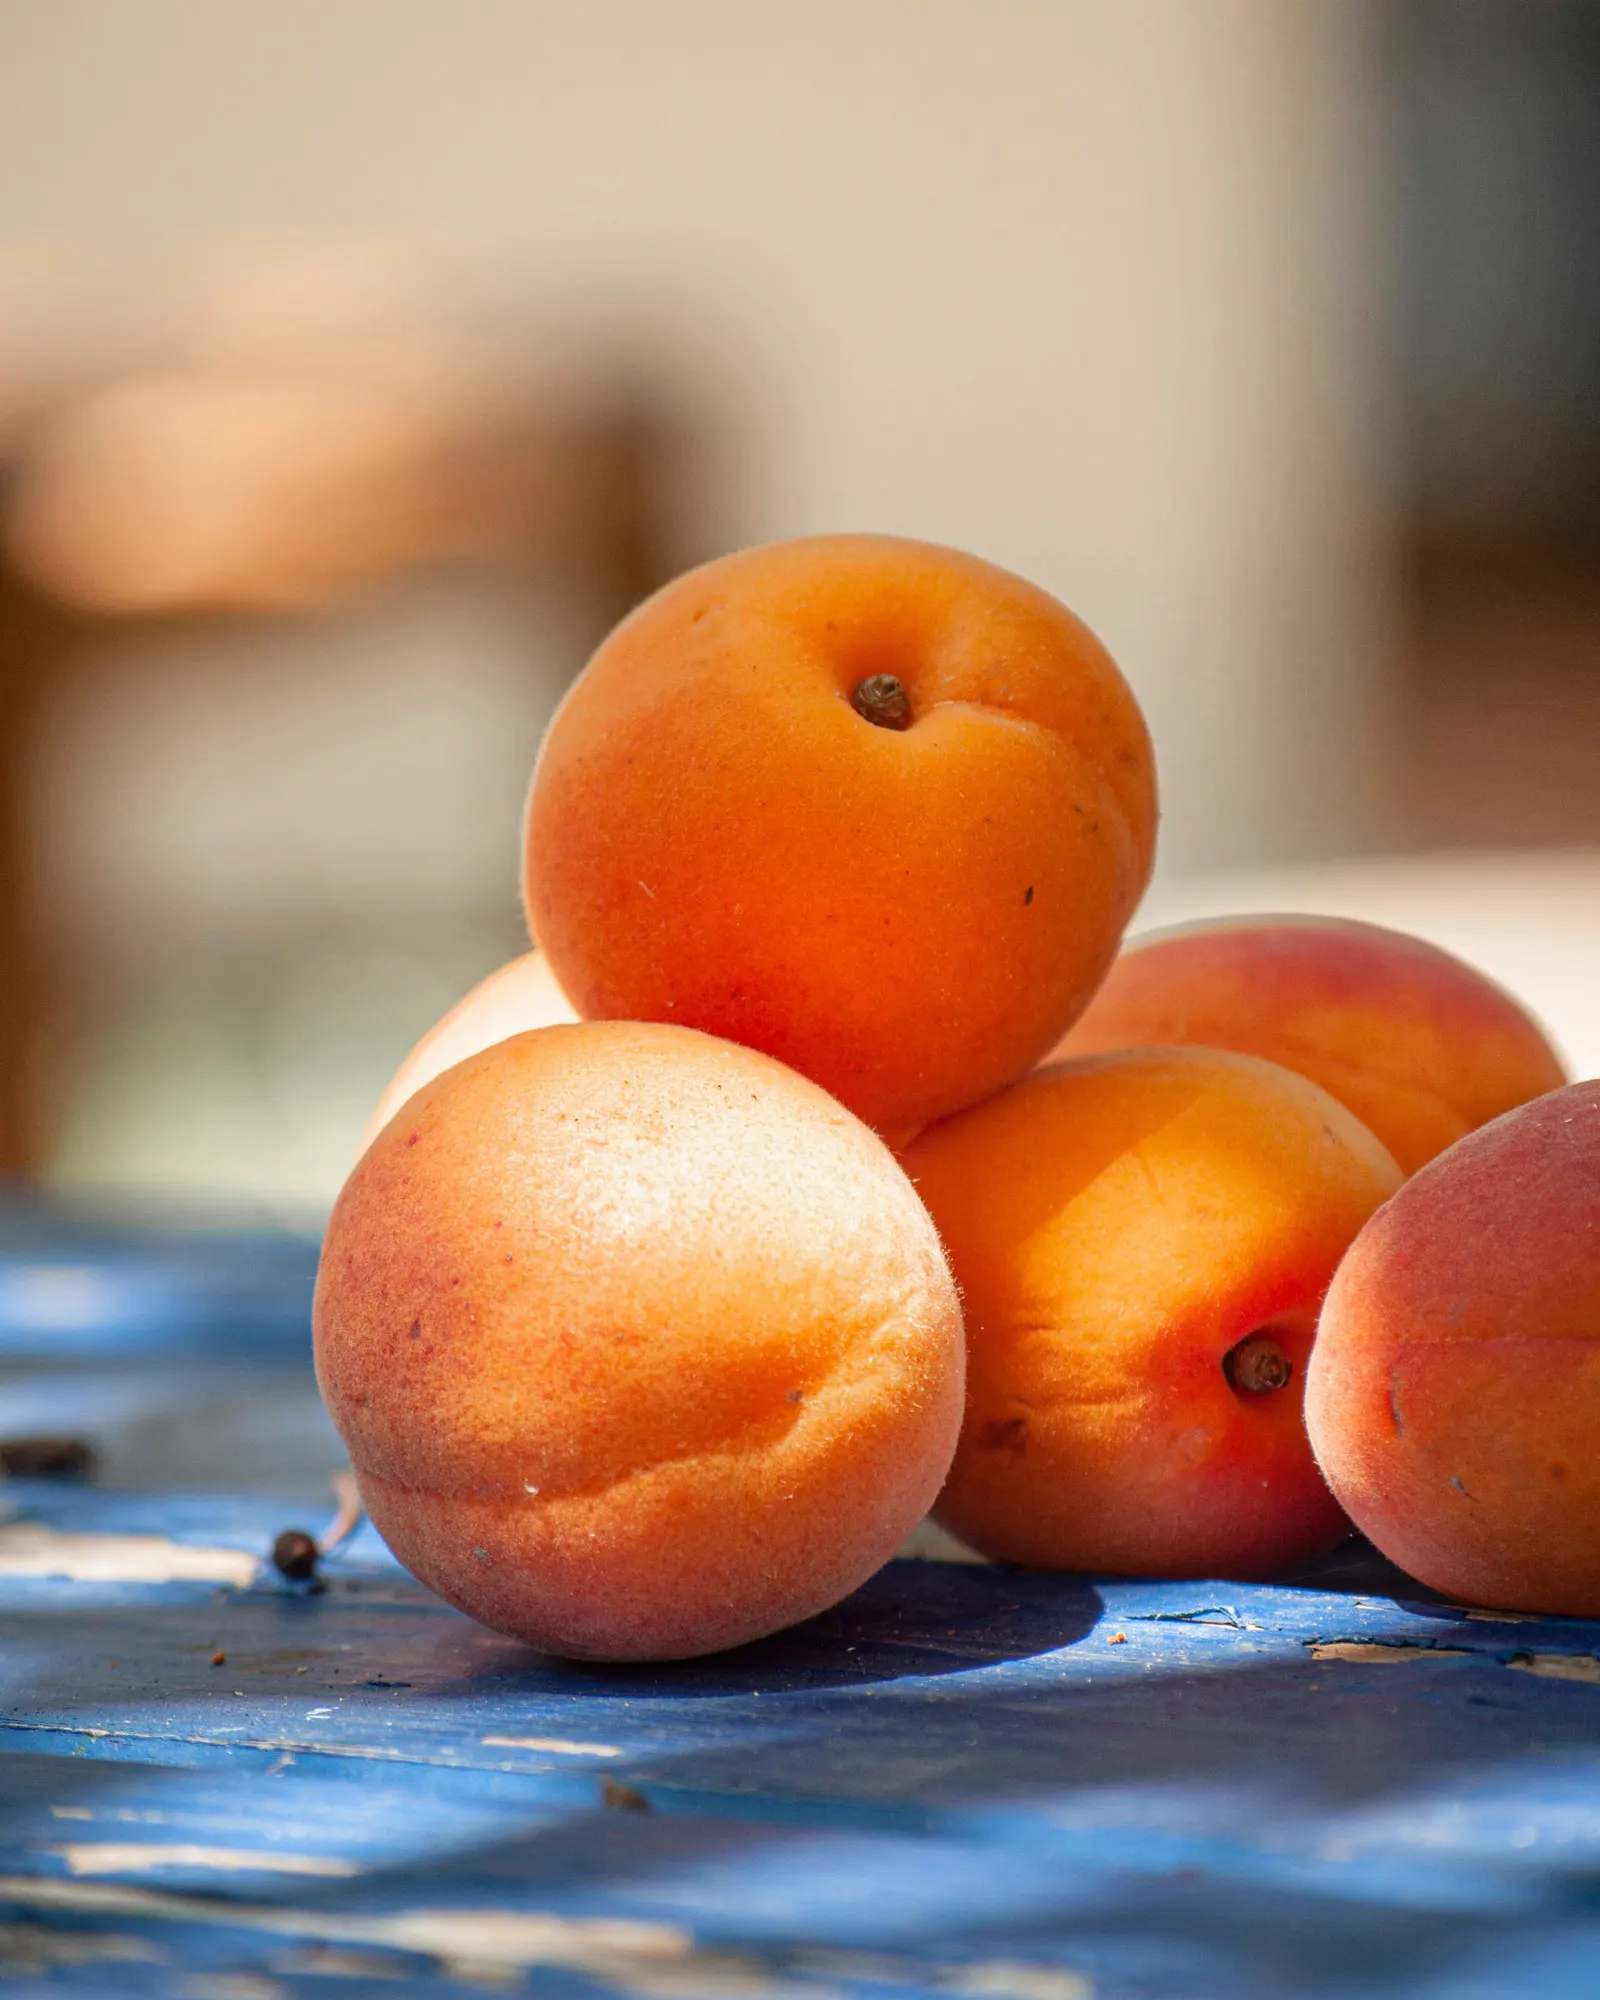 A photo of apricots to help with the penmanship accent analogy.